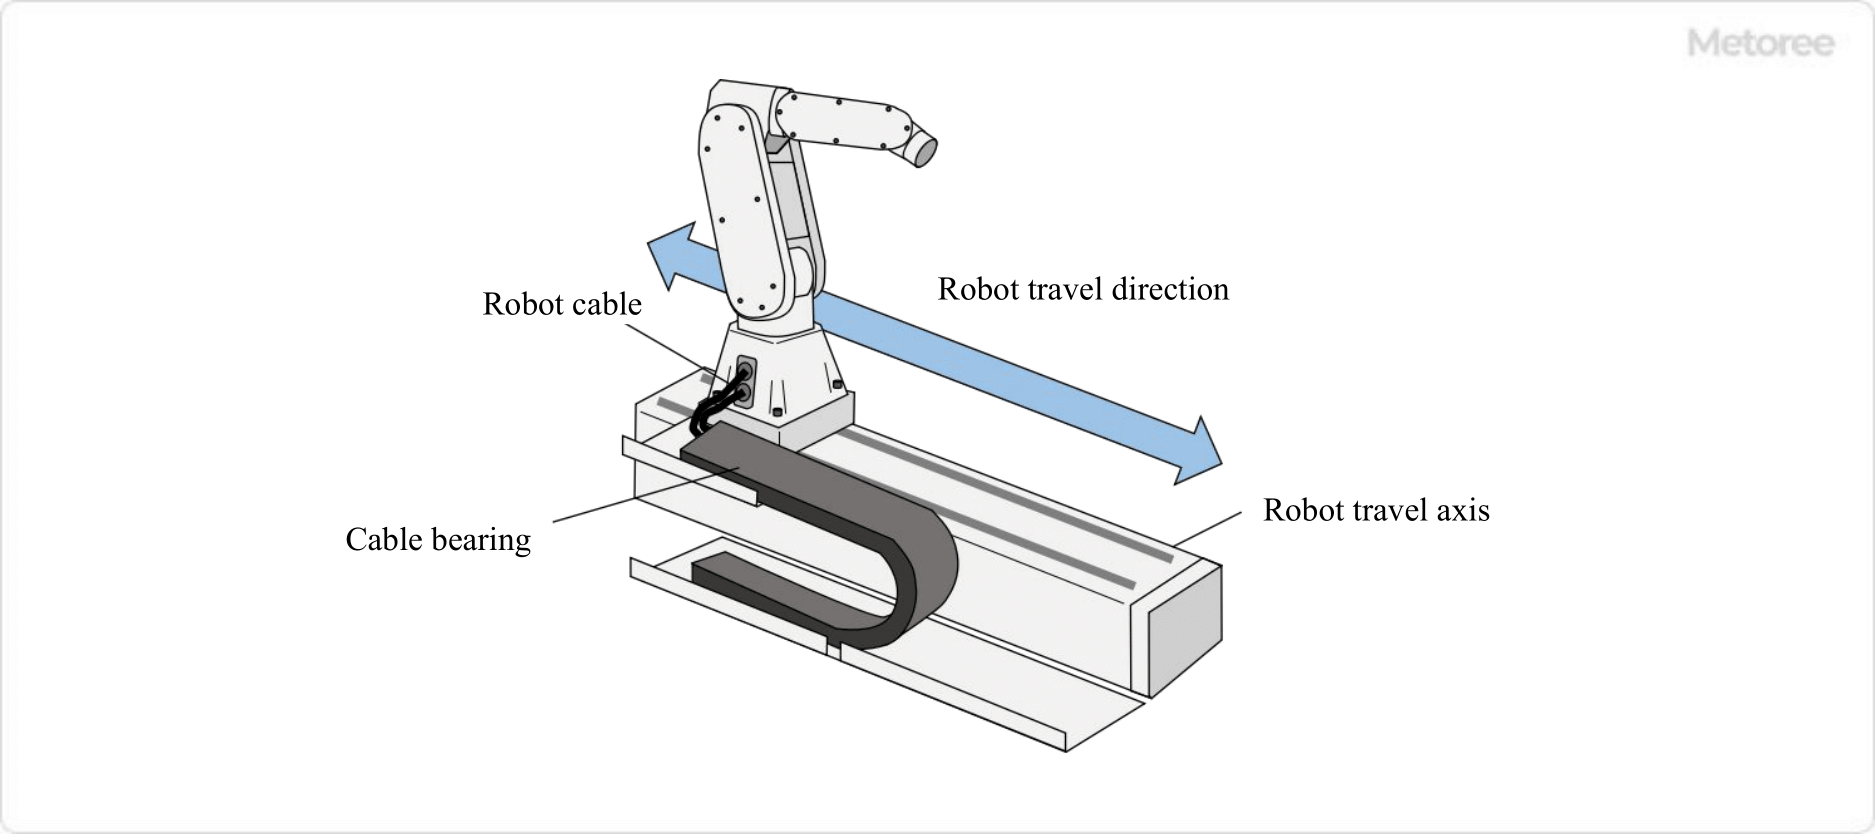 Figure 3. Measures to prevent robot cable breakage